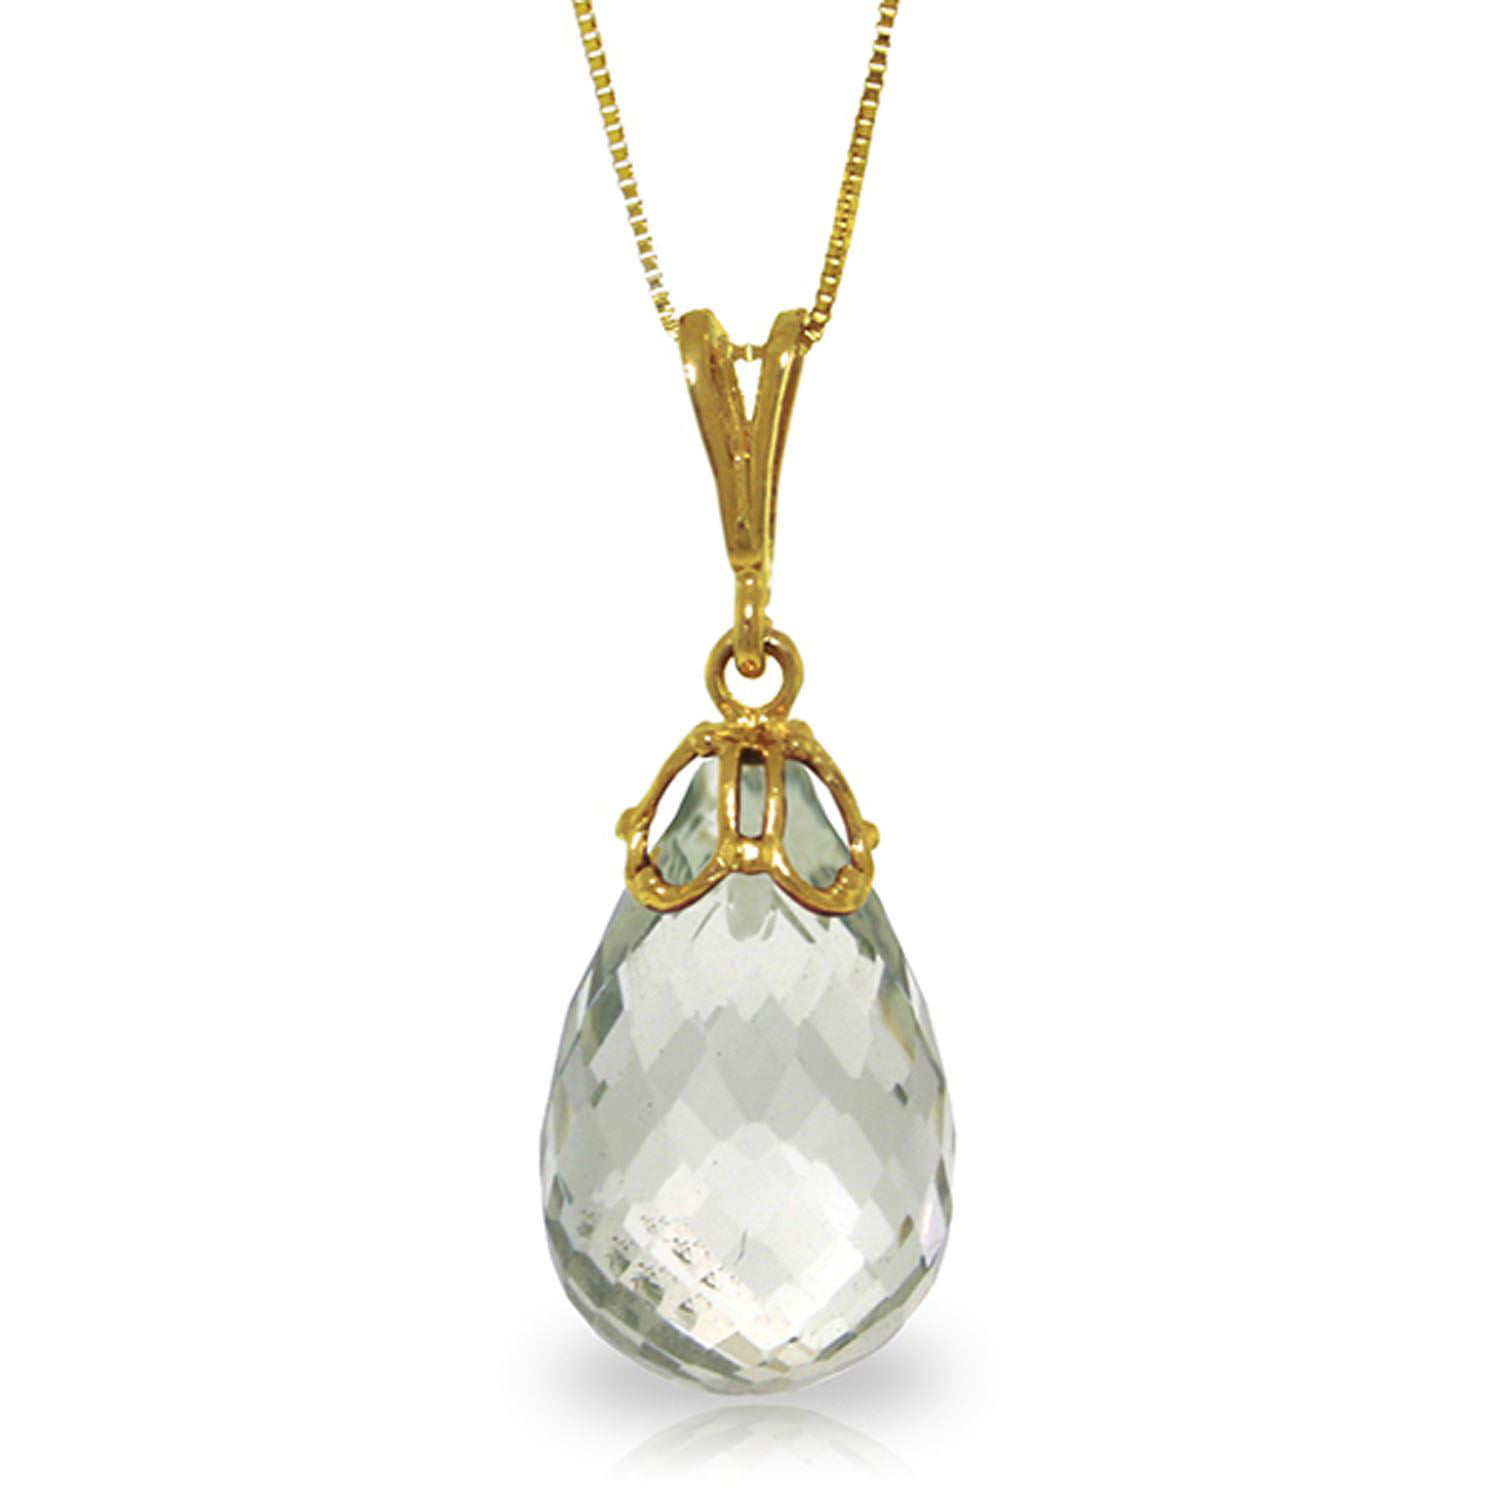 ALARRI 7 Carat 14K Solid Gold Engage Green Amethyst Necklace with 24 Inch Chain Length